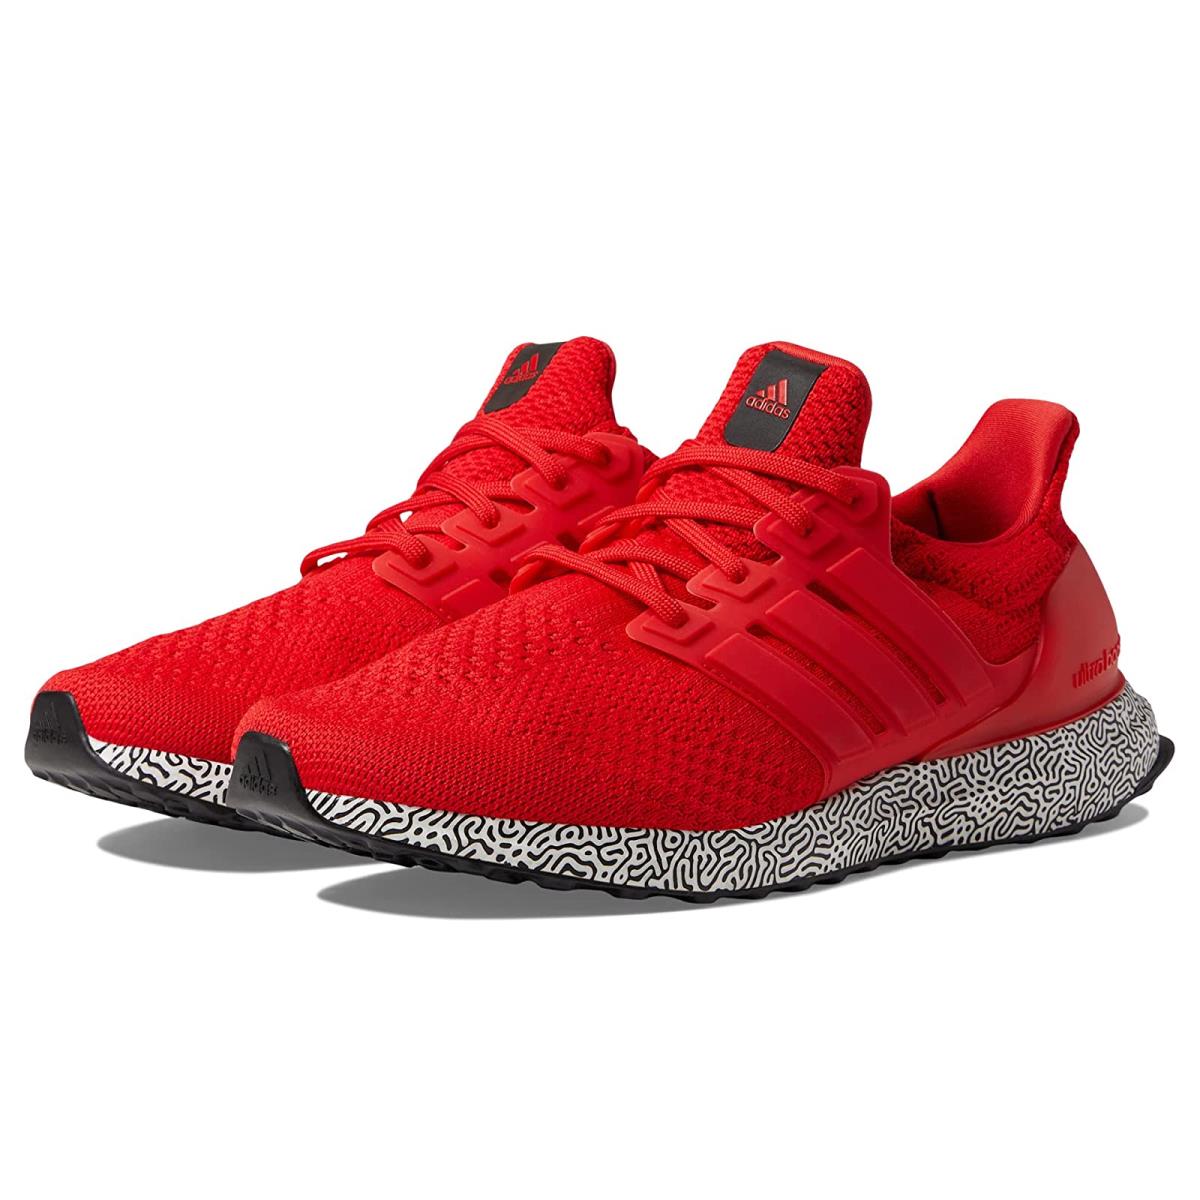 Man`s Sneakers Athletic Shoes Adidas Running Ultraboost Dna Vivid Red/Vivid Red/Black